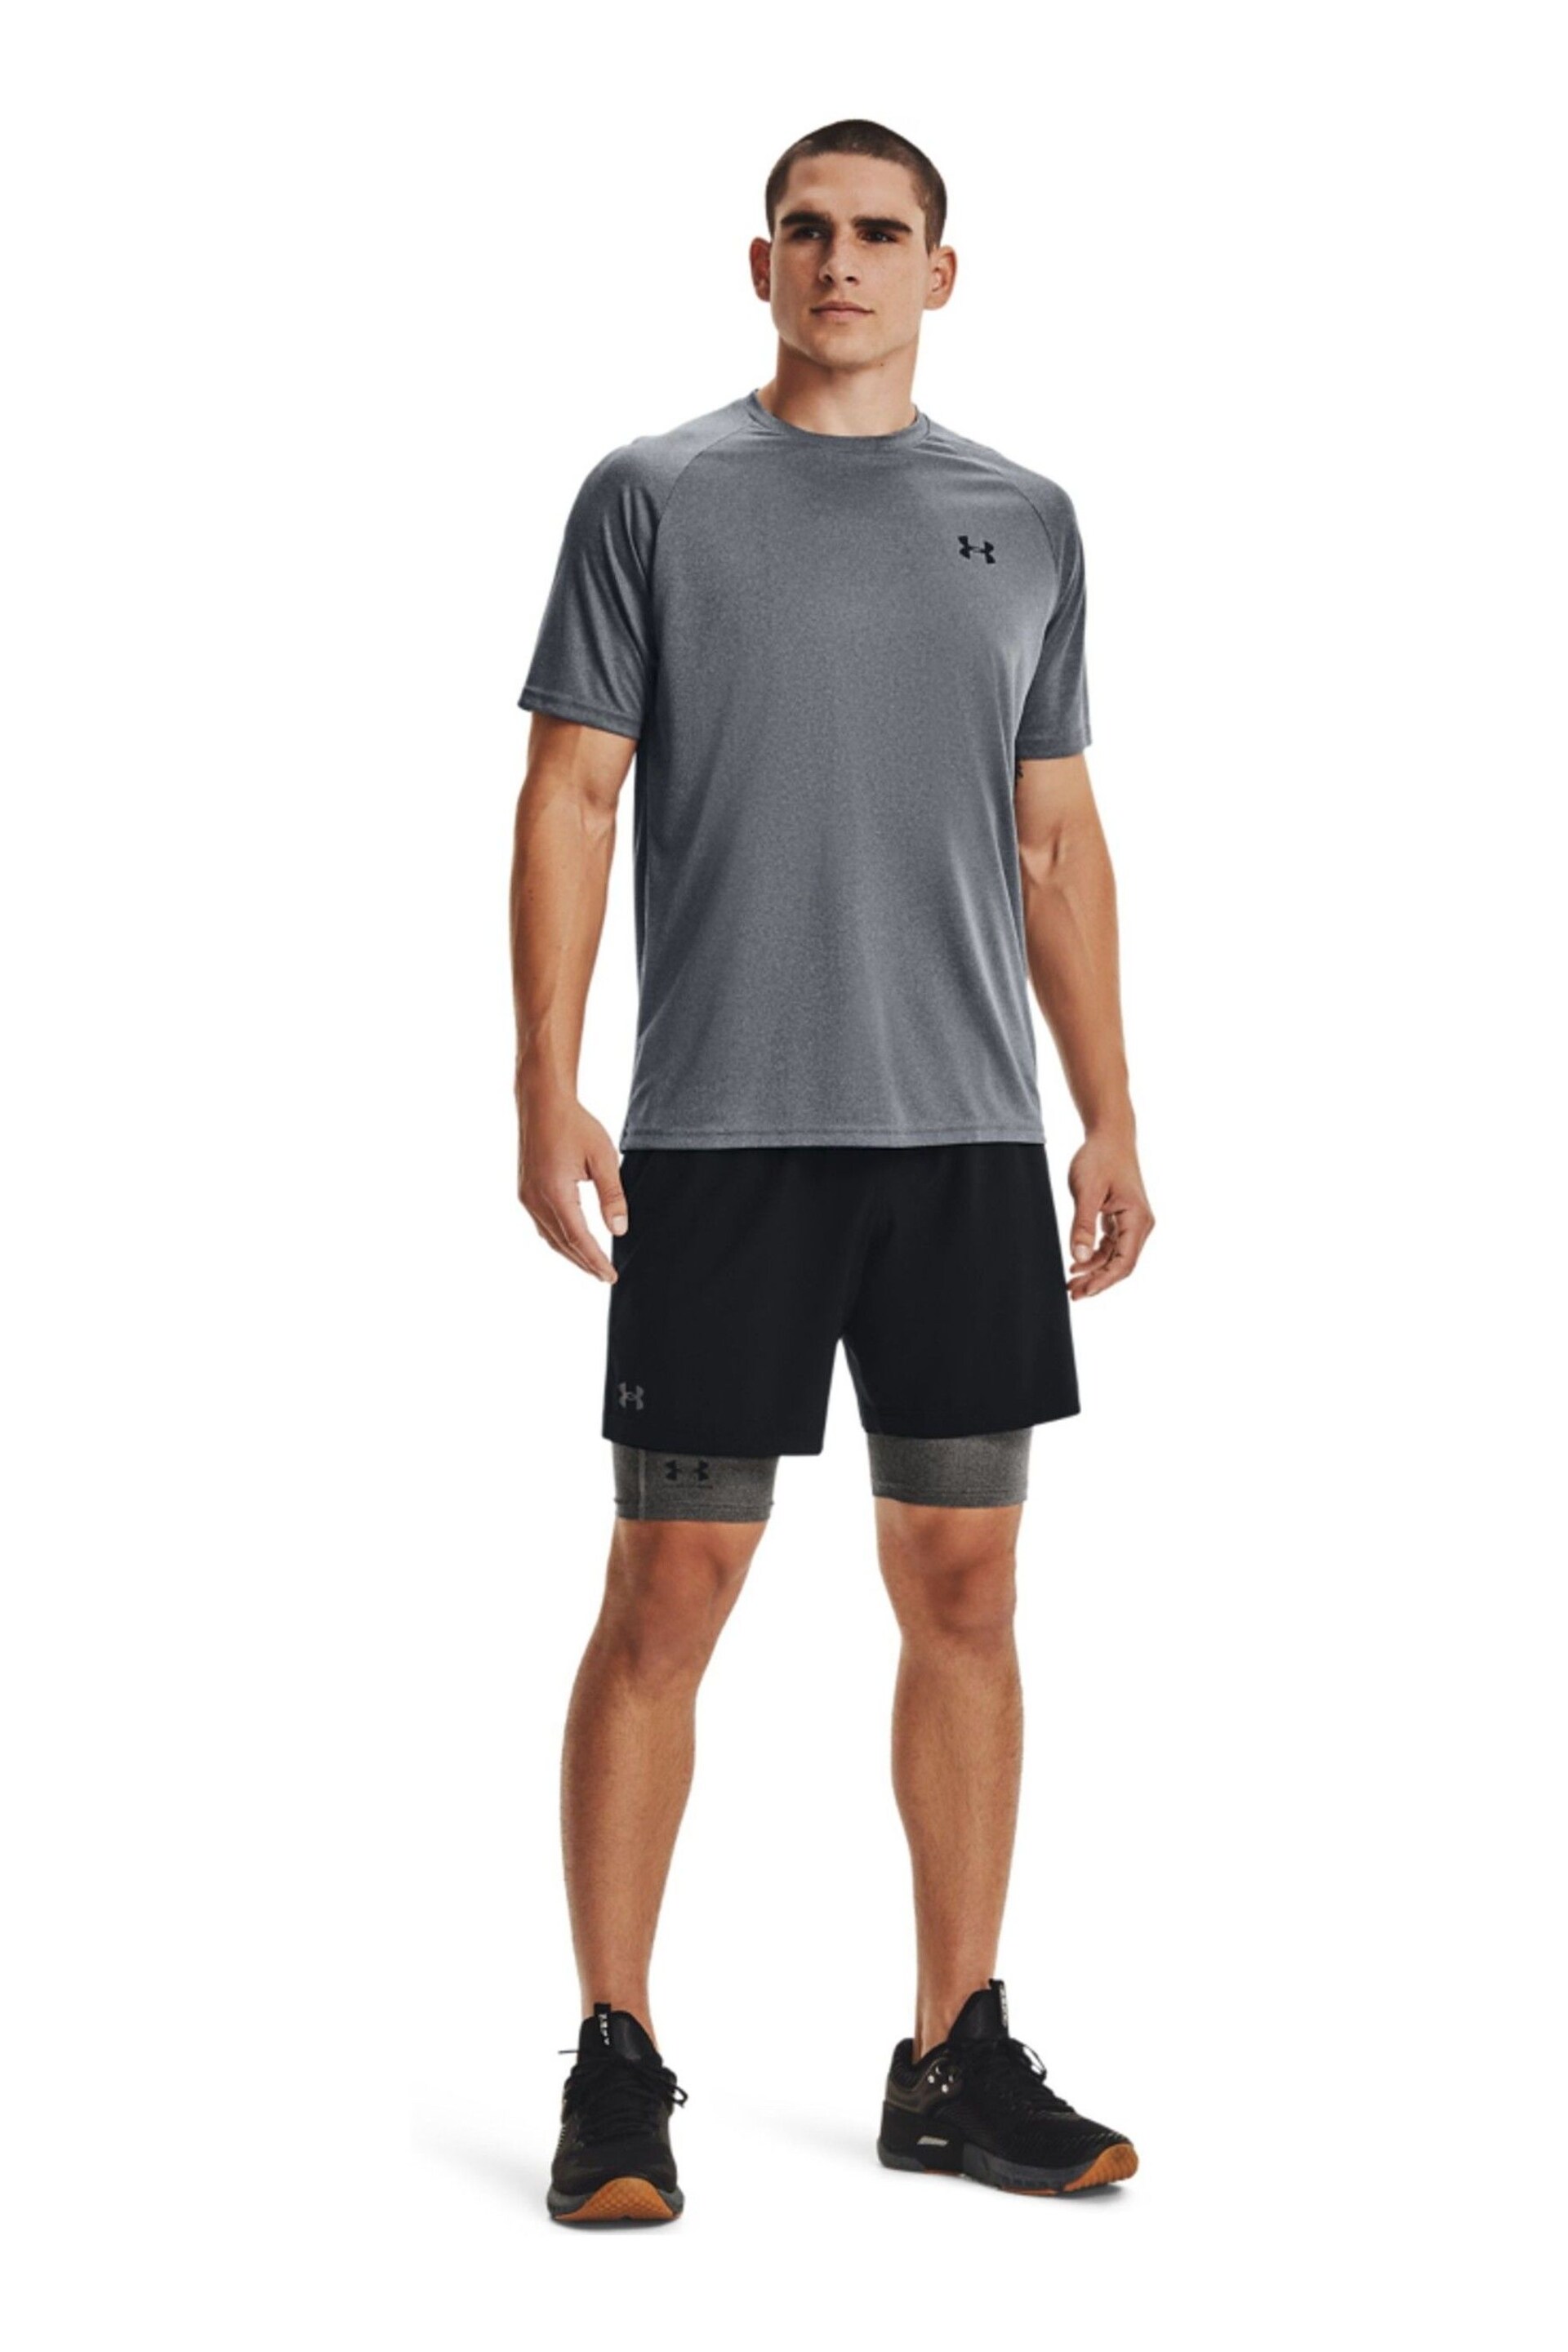 Under Armour Grey Heat Gear Armour Long Shorts - Image 3 of 8